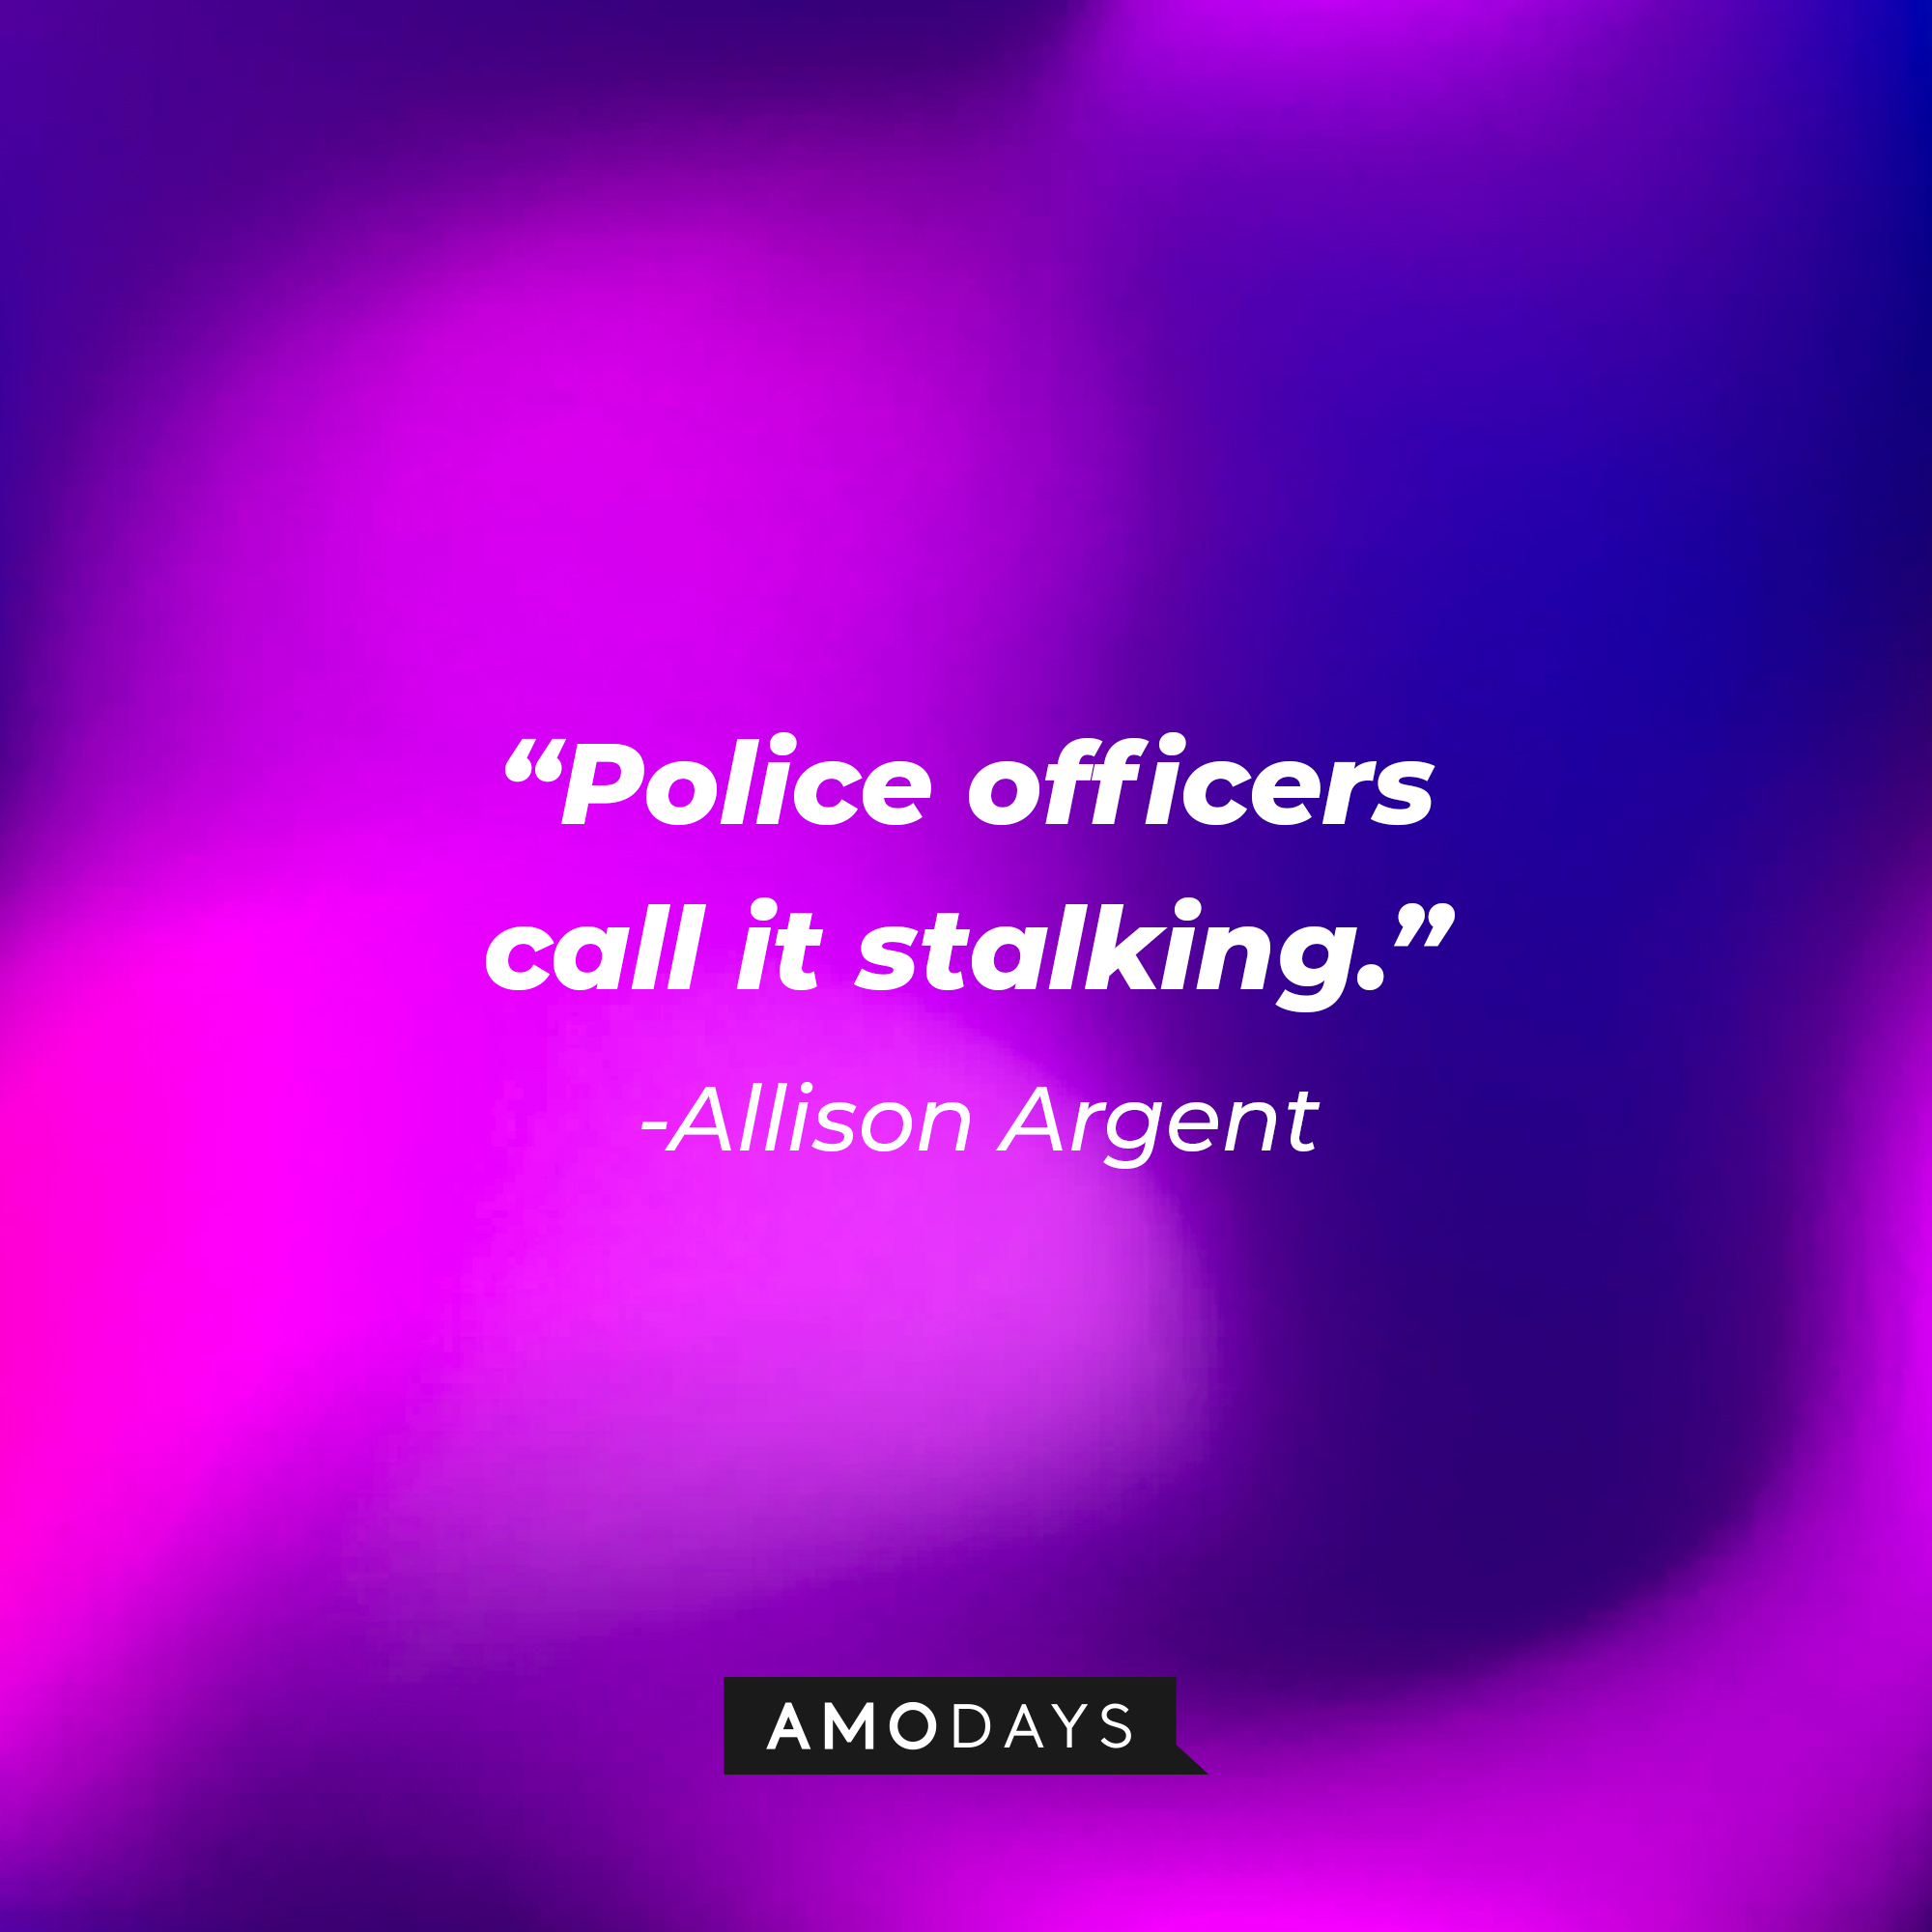 Allison Argen’s quote:"Police officers call it stalking." | Source: AmoDays